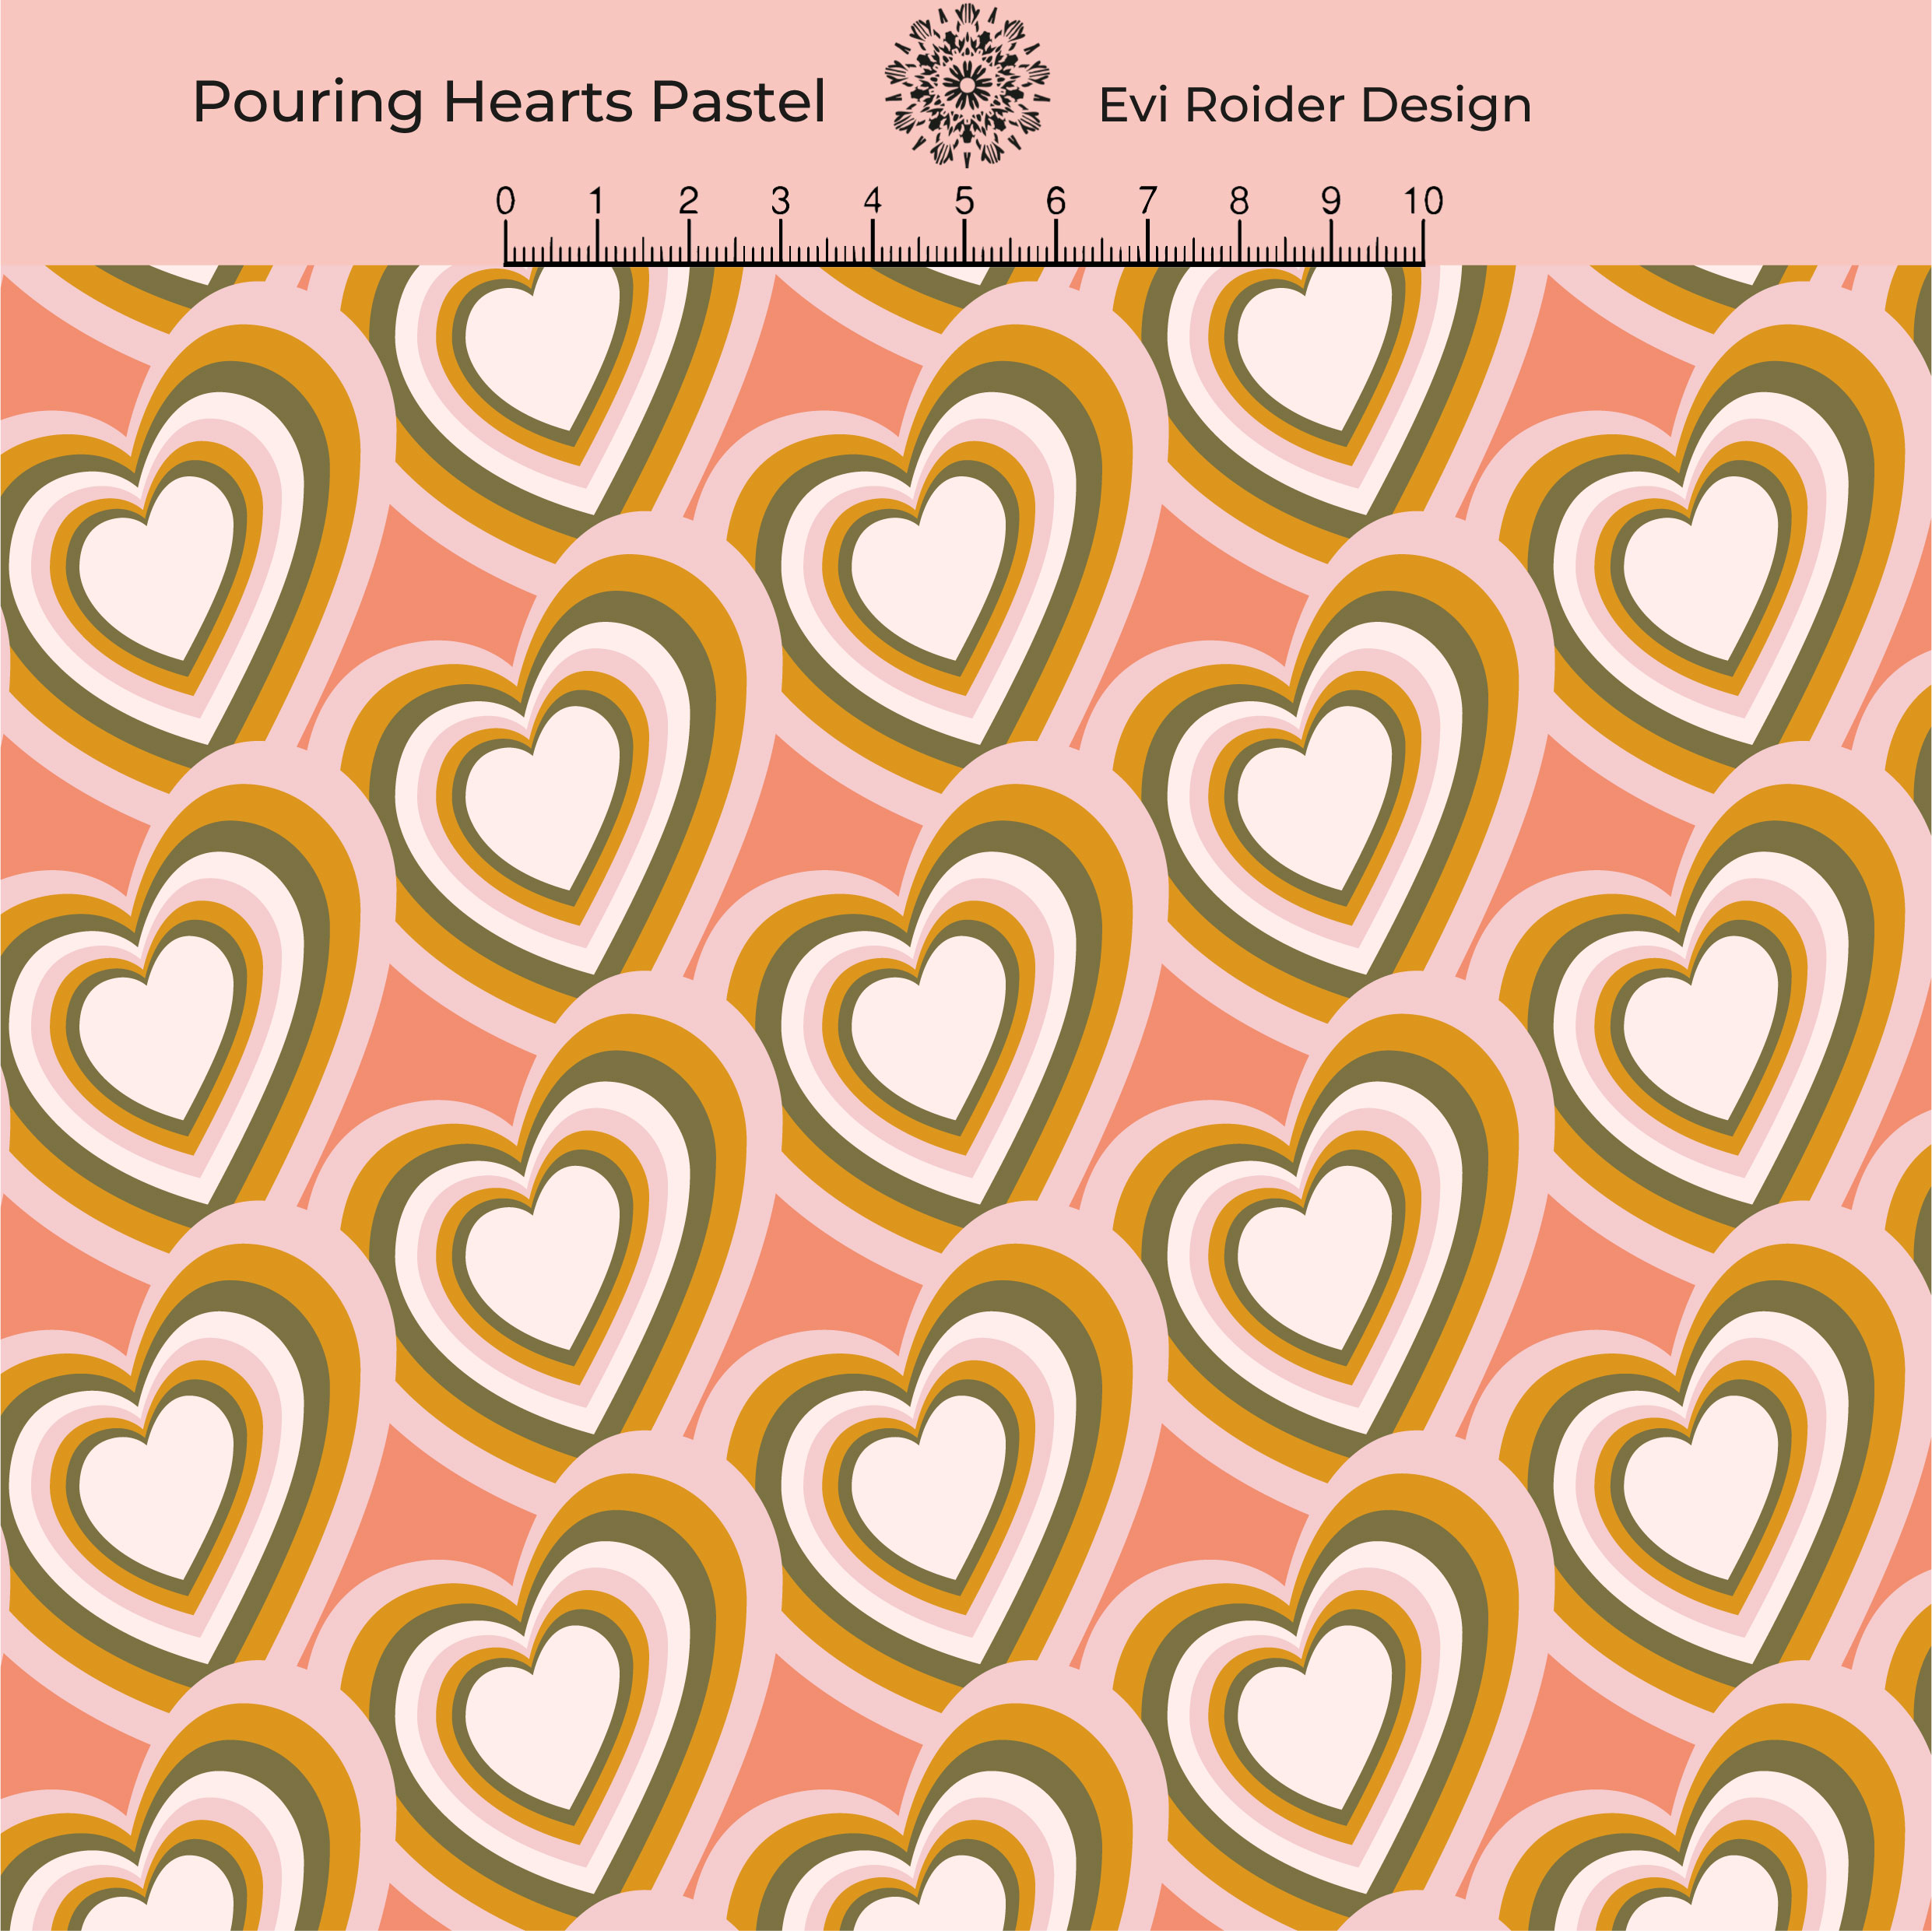 Pouring Hearts Pastel